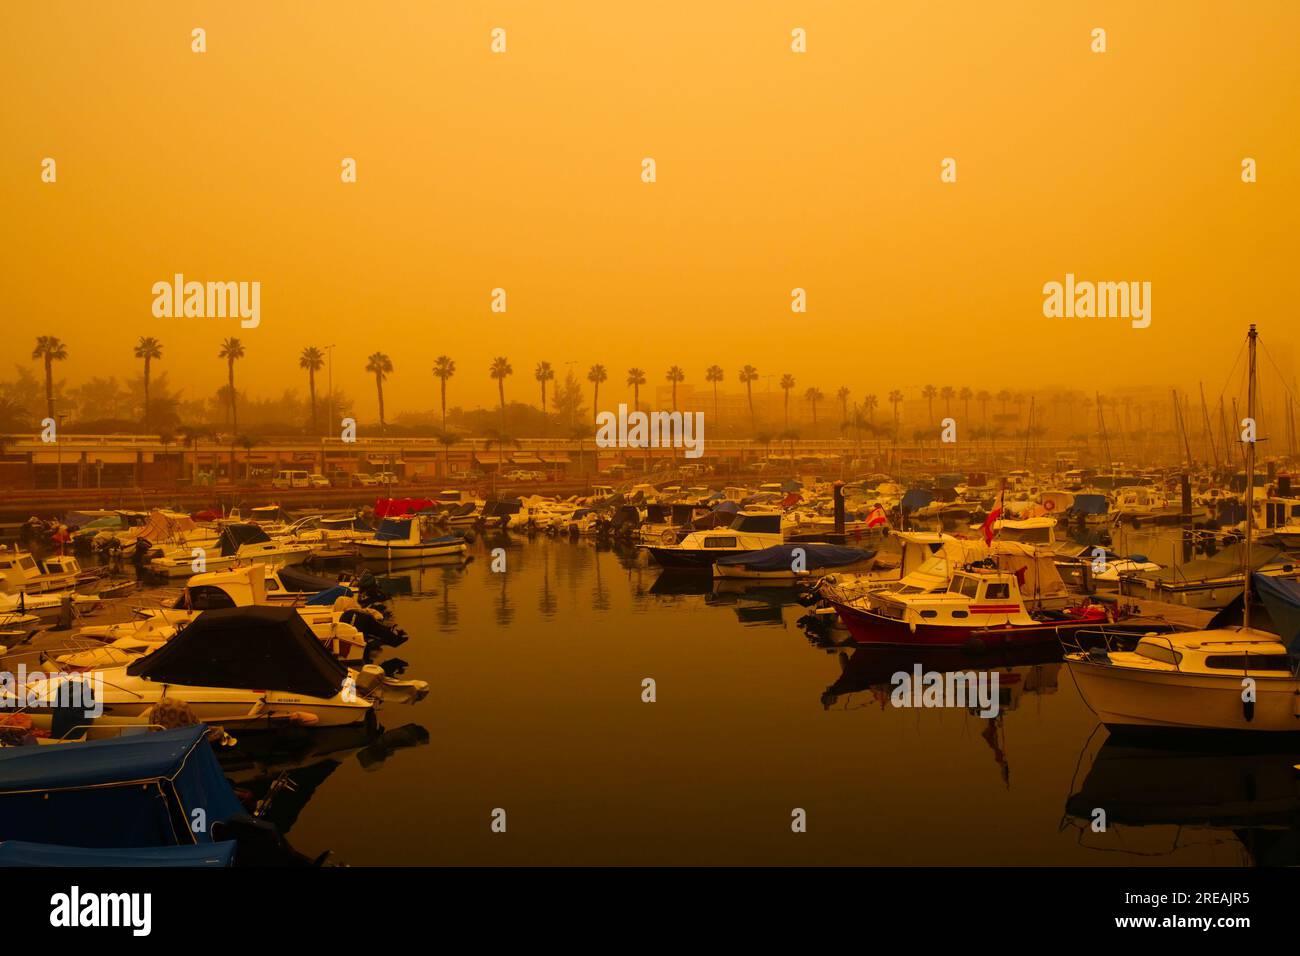 Las Palmas, Gran Canaria, Spain; February 23 2020 - Limited visibility during extreme weather conditions: calima, or calina, (English: desert dust atm Stock Photo